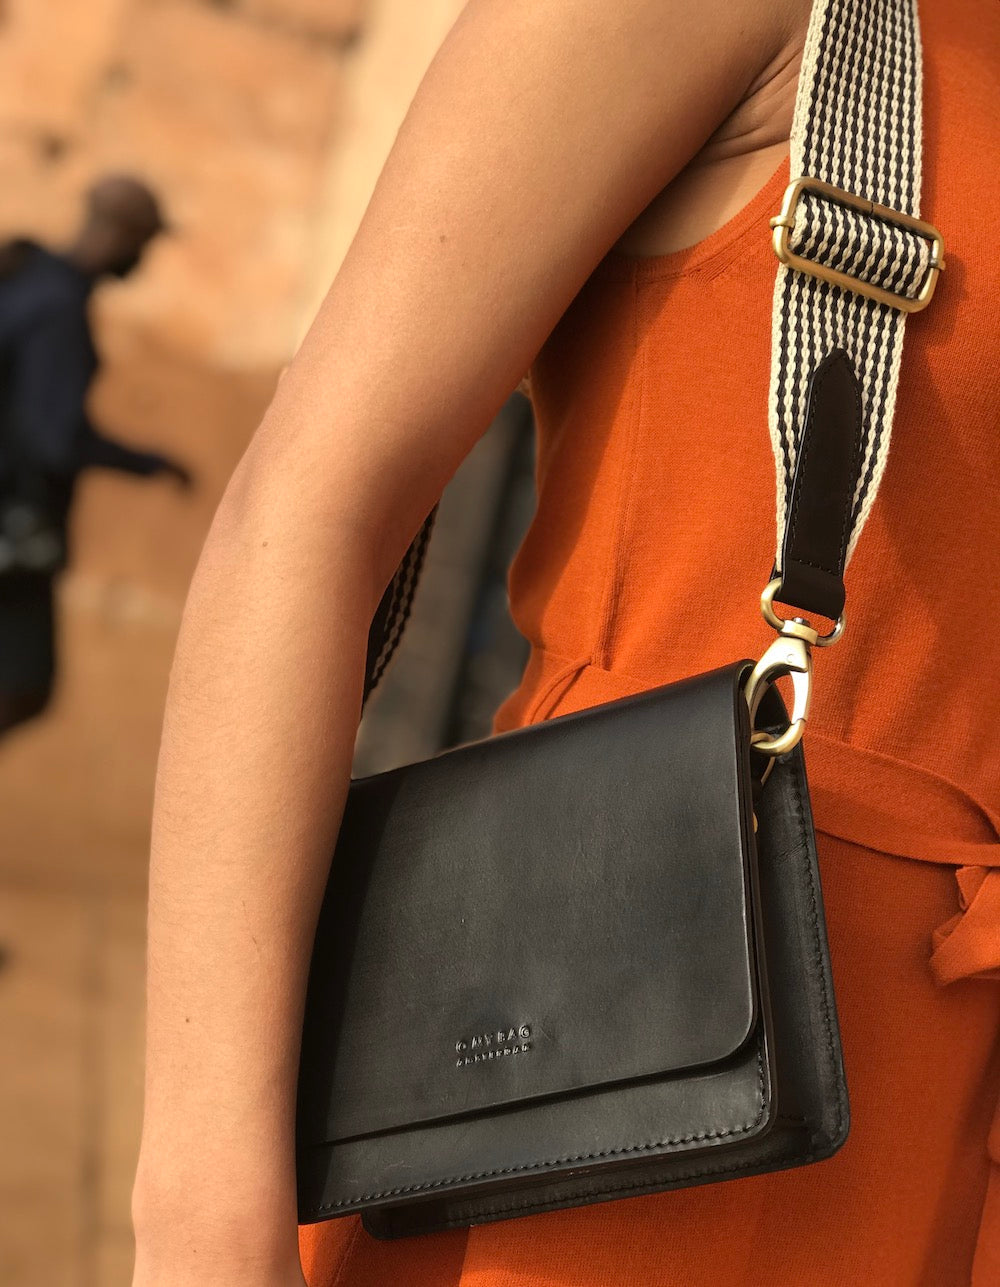 O My Bag's classic Audrey Mini is back, and she’s now available in Apple Leather! Introducing their new vegan material made from apple waste. Just like the original design, the exterior feels and behaves like classic leather, in fact, it’s hard to tell the difference! Made in India.